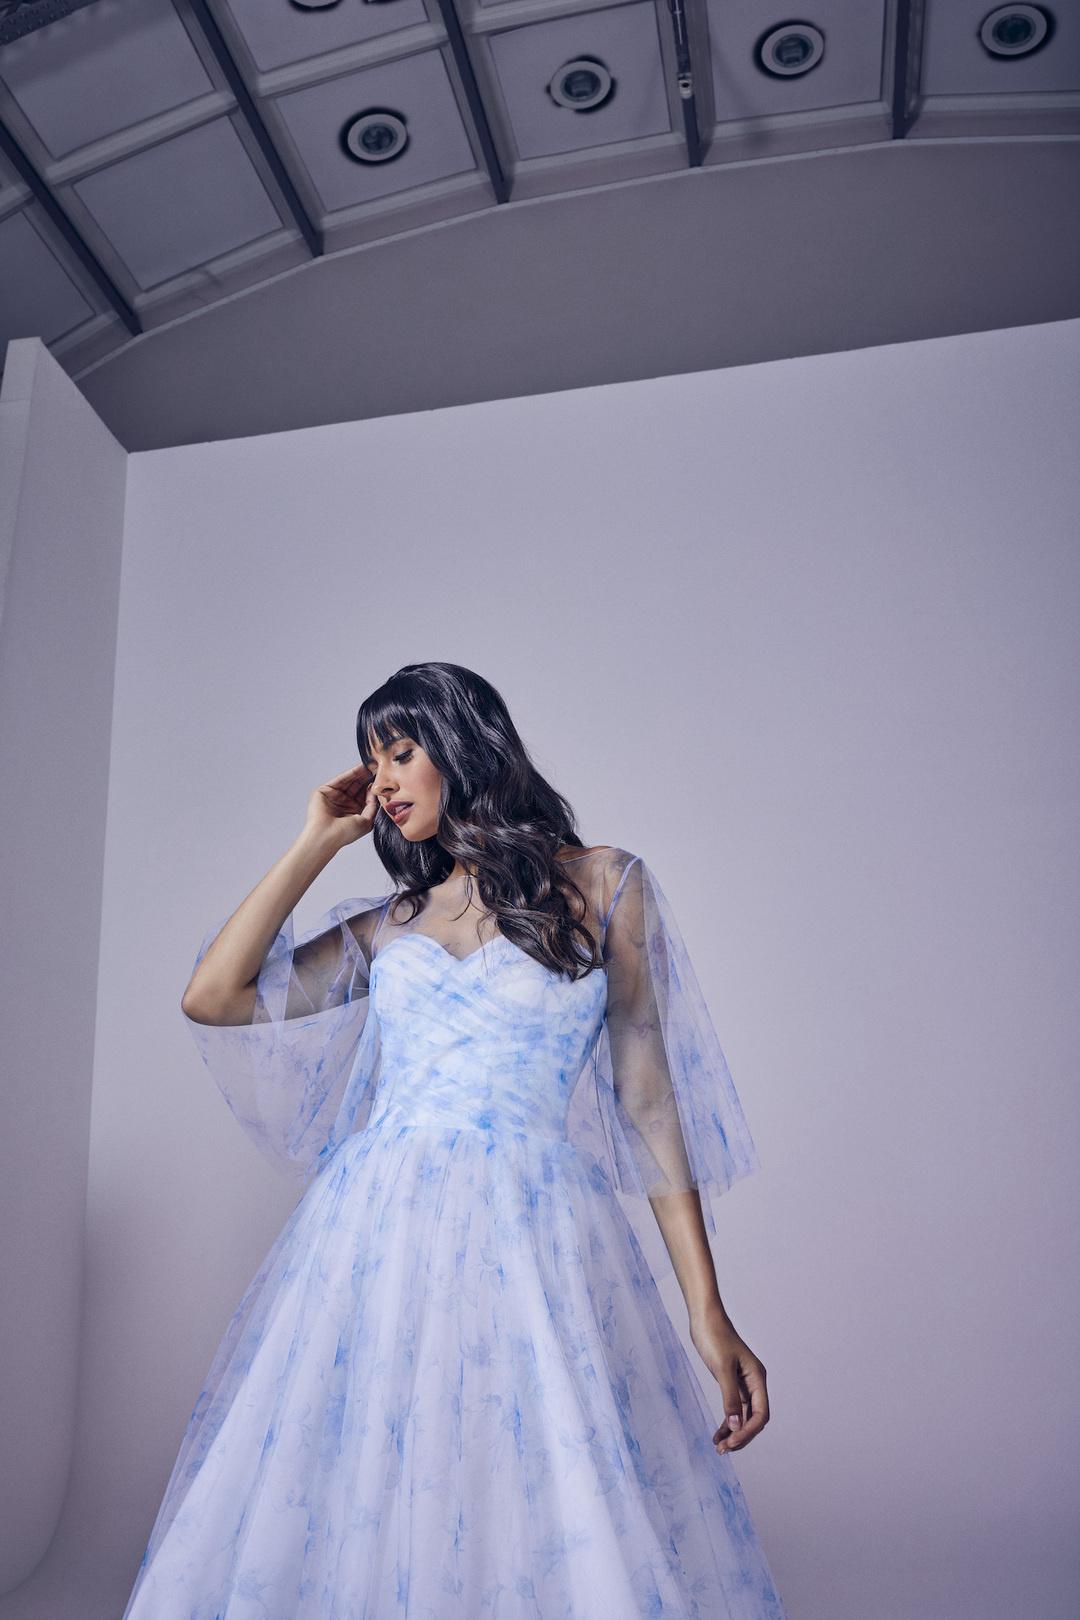 Olive skinned woman with long black hair a fringe wearing a light blue and white tulle strapless wedding dress with a sweetheart neckline and a sheer blue and white tulle jacket